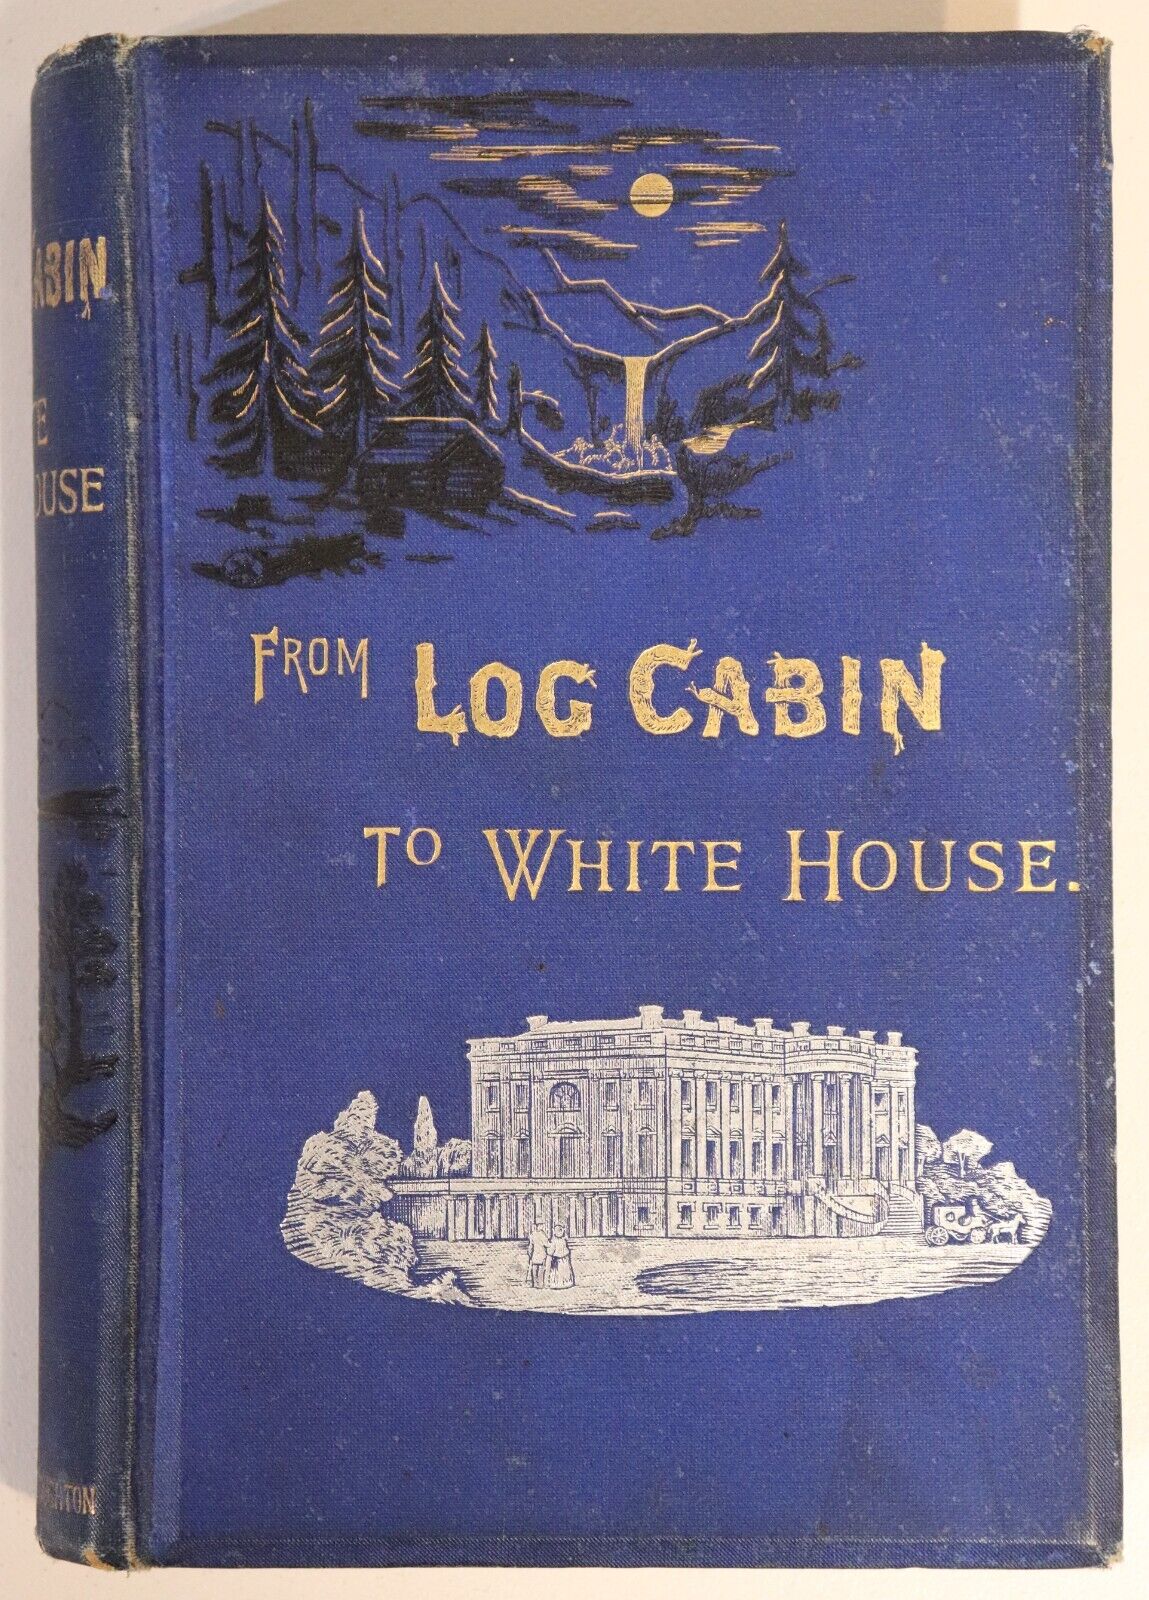 From Log Cabin To White House - 1884 - Antique American History Book